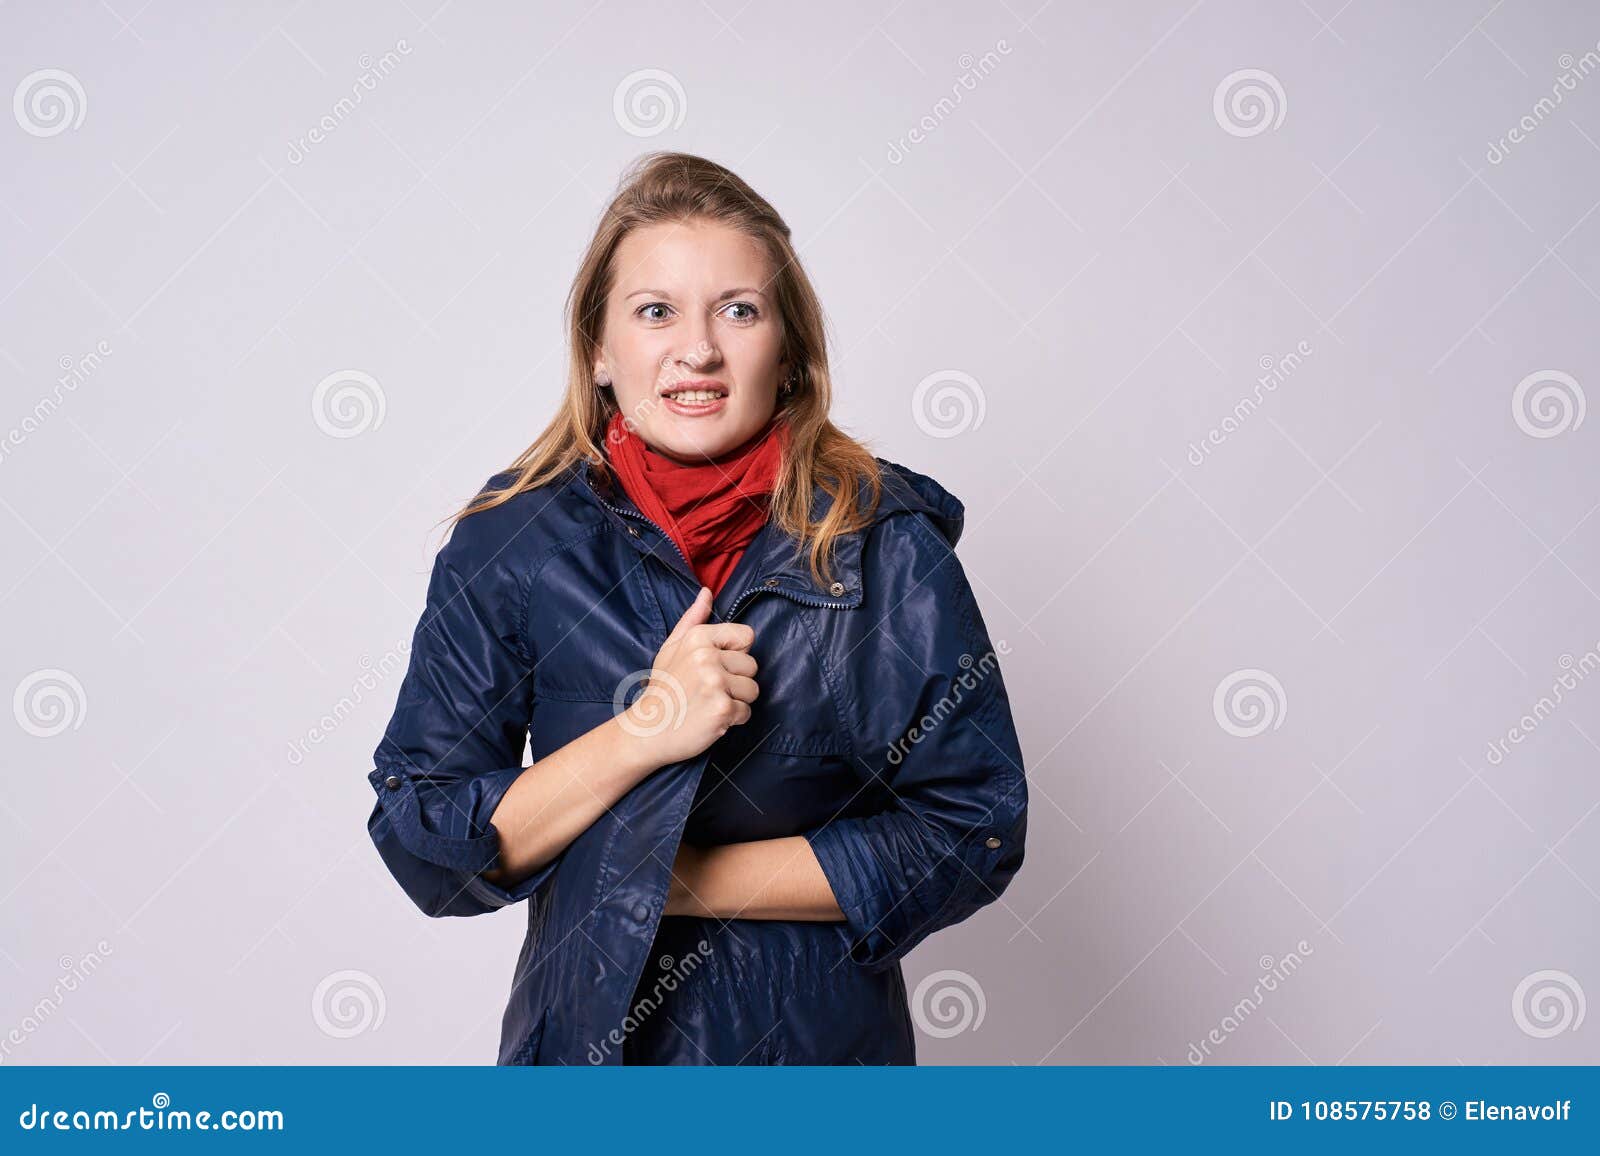 chills. warm clothes. young girl. white background